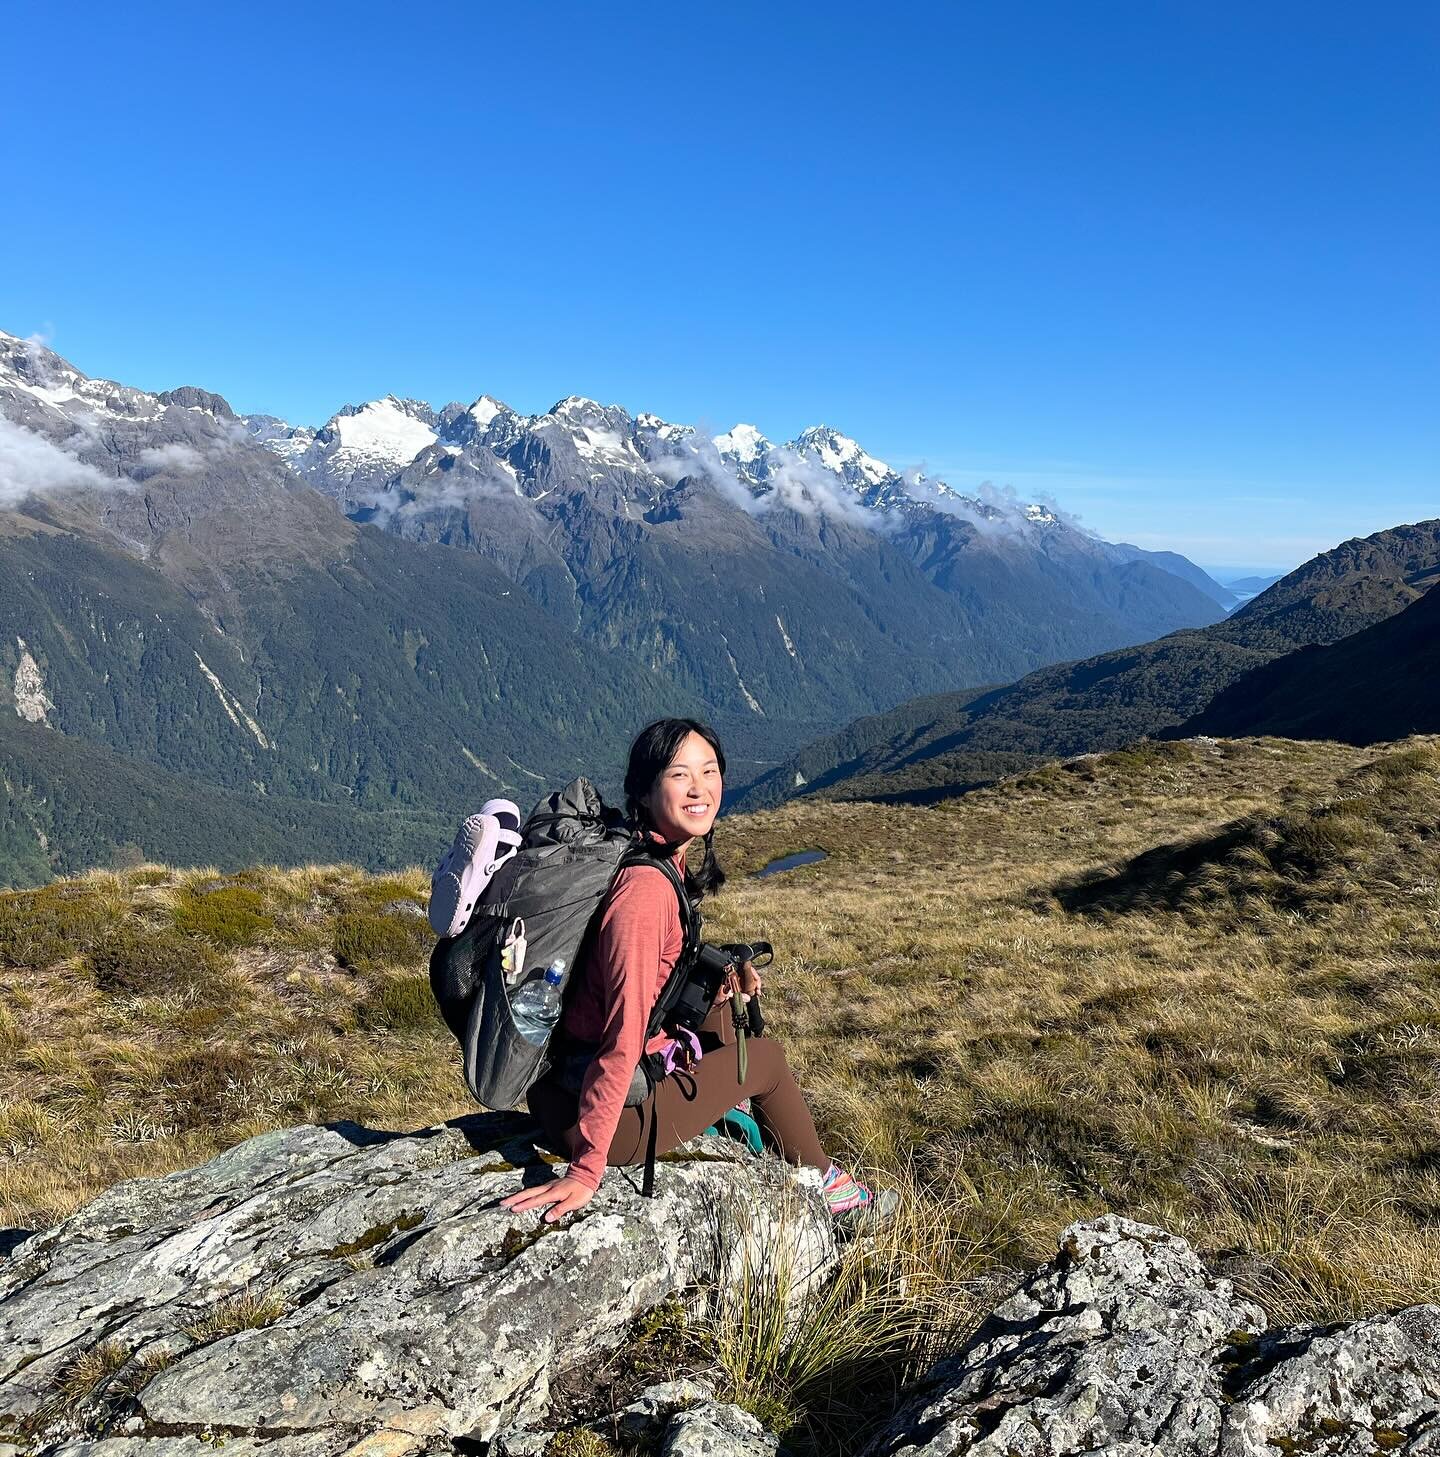 I did all 3 Fiordland Great Walks in the same New Zealand trip, so I thought I&rsquo;d do my completely-subjective-and-conditional-on-weather superlatives, just for fun 😄 

Best views: Lake Mackenzie hut to Routeburn shelter (Routeburn day 2)
Best s